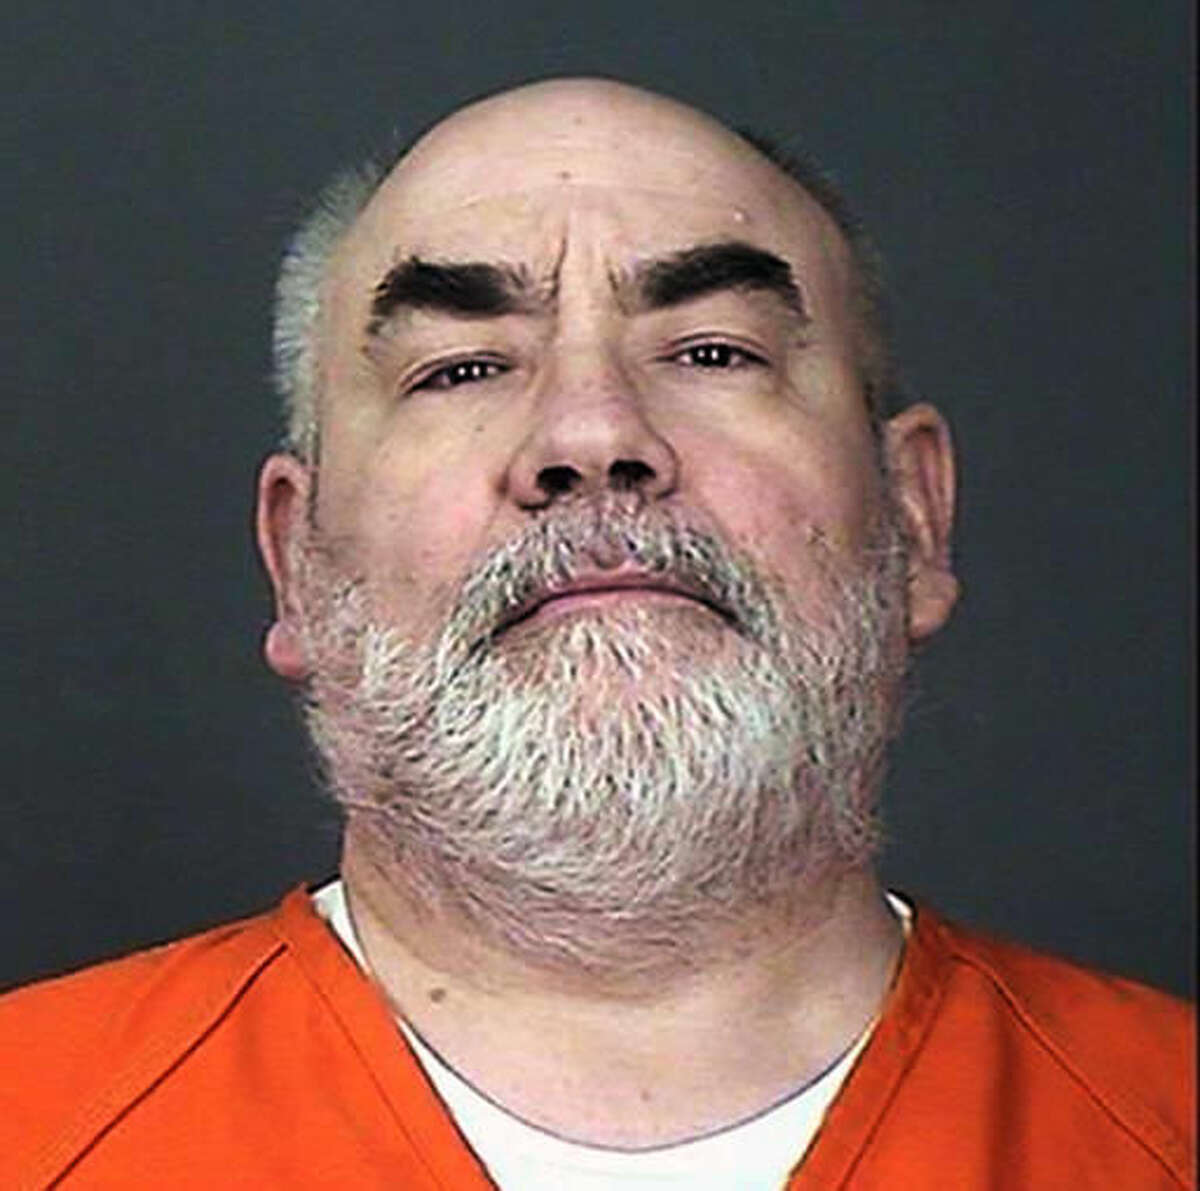 FILE - This undated photo provided by the Sherburne County Sheriff's Office shows Danny Heinrich, of Minnesota. Heinrich, who confessed to kidnapping, sexually assaulting and killing 11-year-old Jacob Wetterling, of St. Joseph, Minn., has shed "countless tears" for Jacob and his family in the 27 years since his death, his lawyer said in a court filing Thursday, Nov. 17, 2016. Heinrich is scheduled to be sentenced in federal court Monday, Nov. 21 on a child pornography charge that stemmed from the investigation into Jacob's disappearance. As part of his plea deal, prosecutors agreed not to charge him with murder. (Sherburne County Sheriff's Office via AP, File)